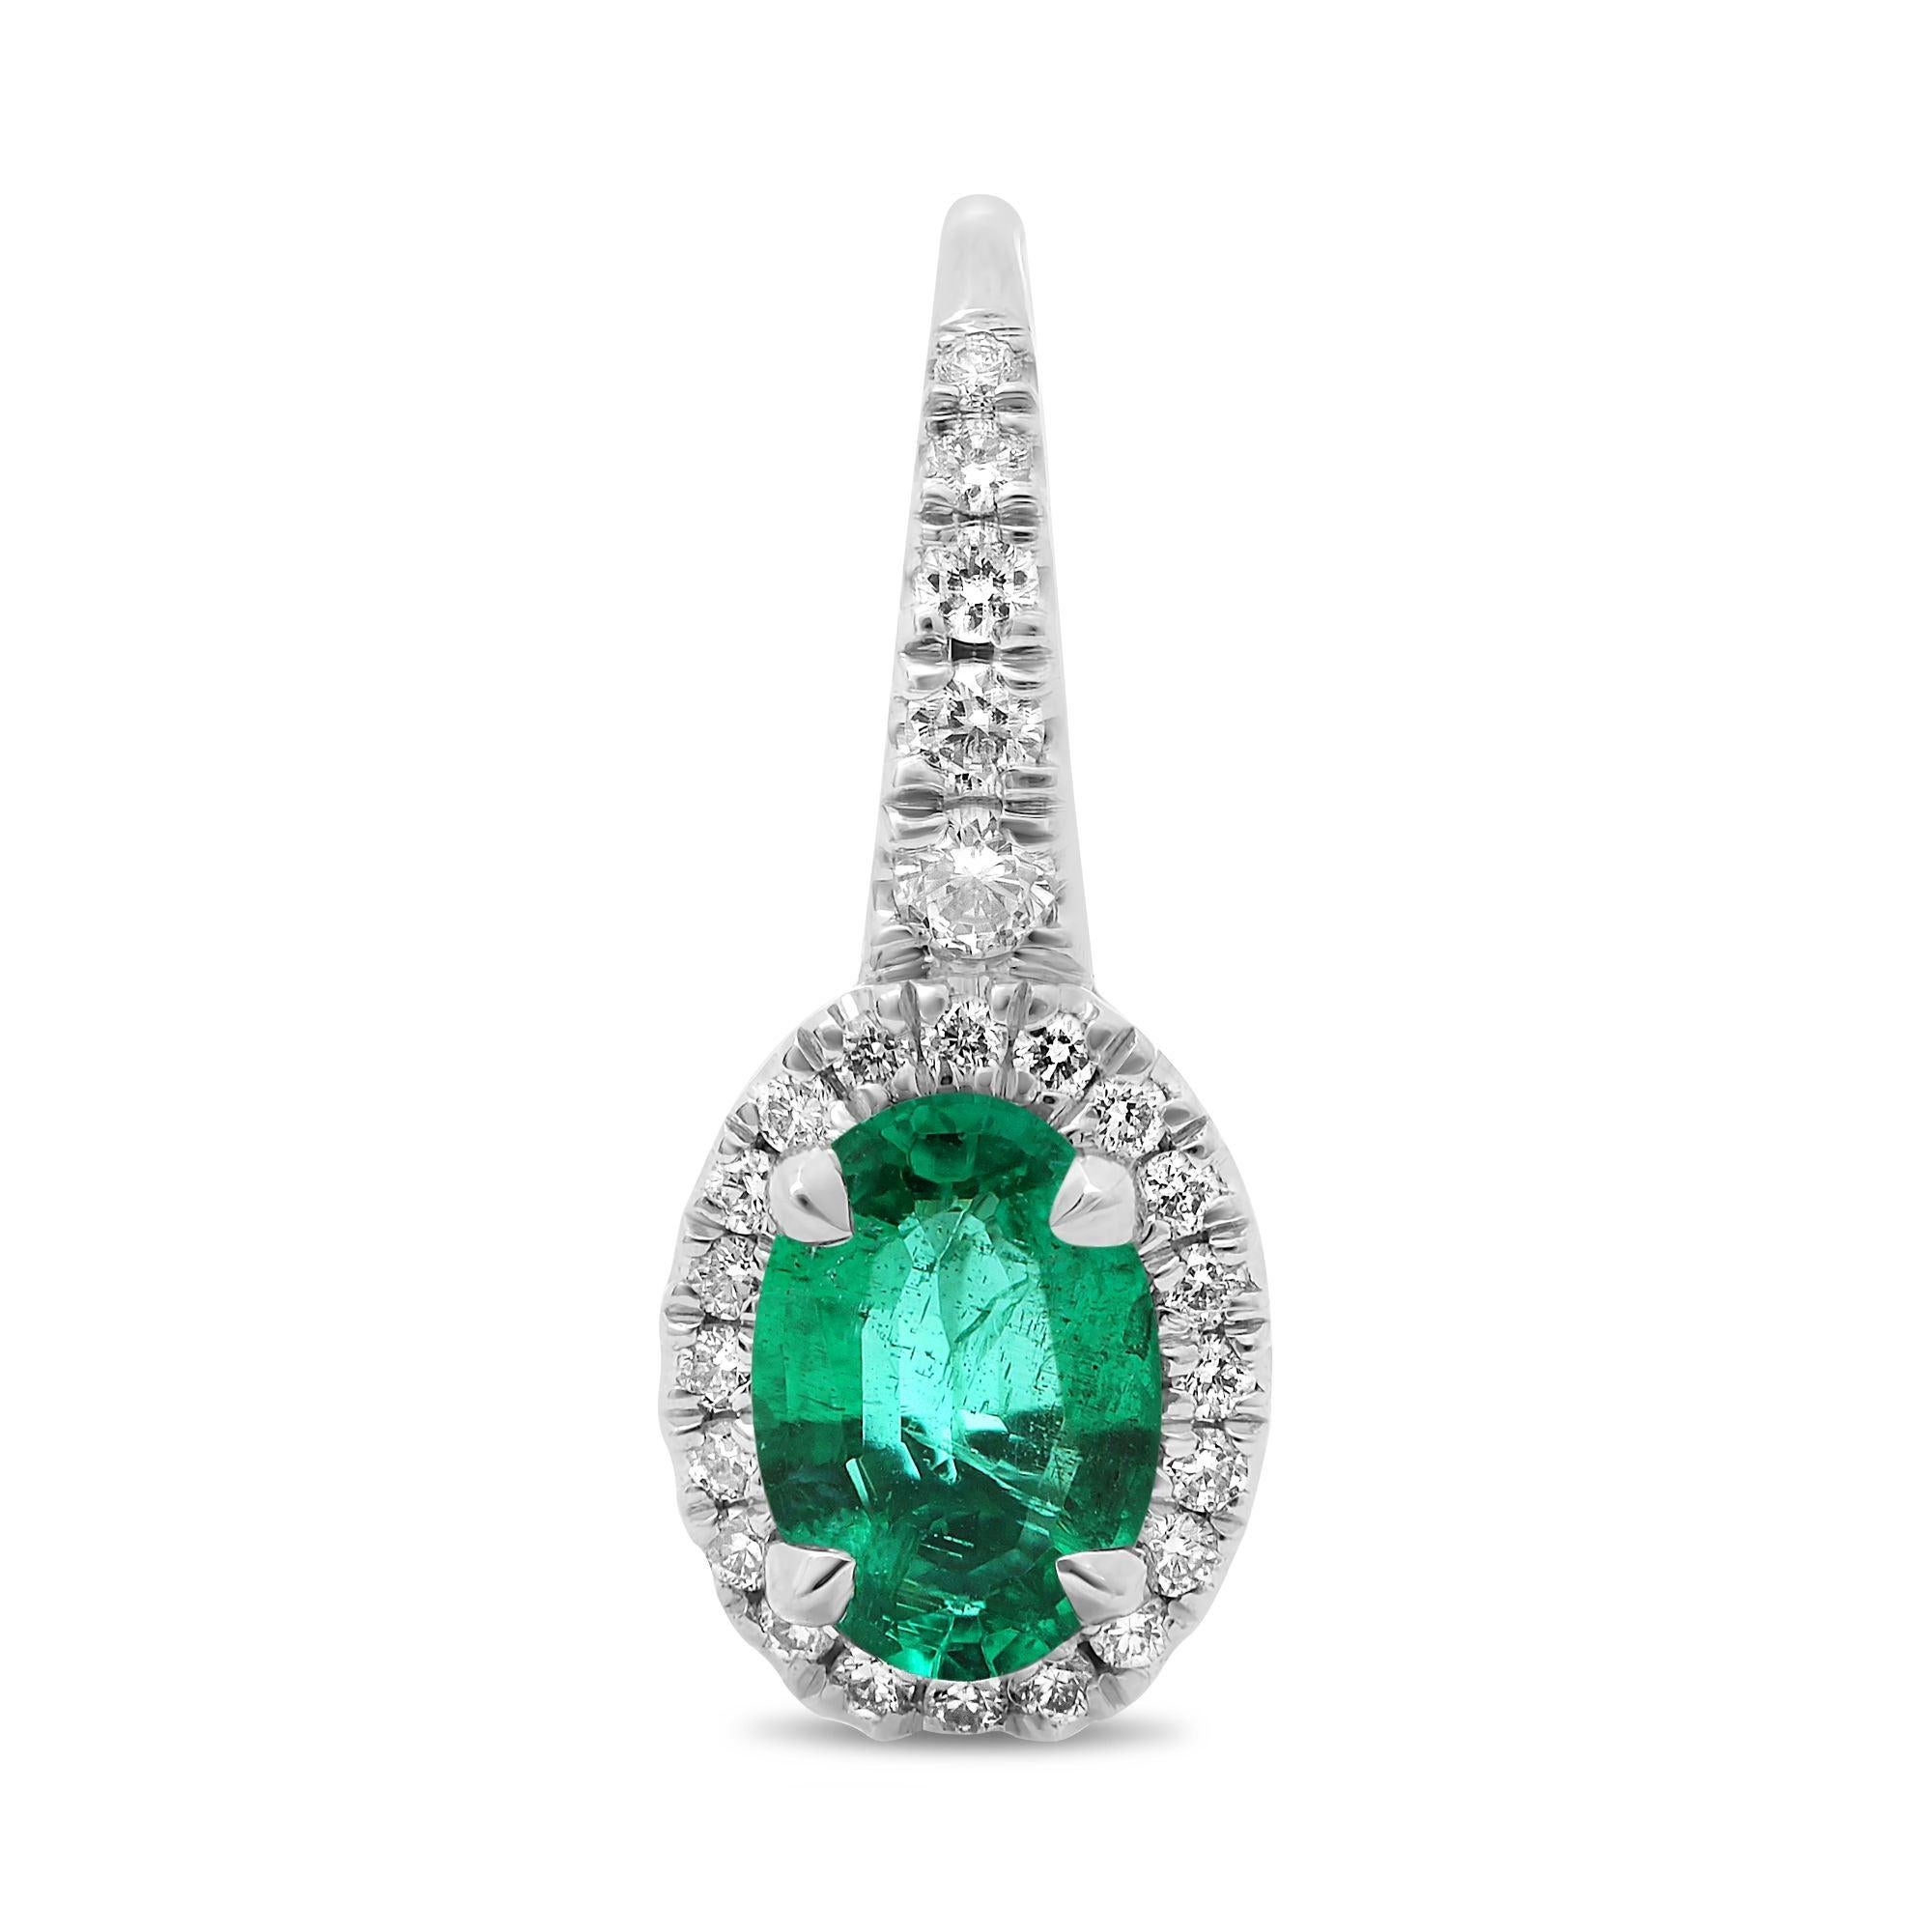 These 18 karat white gold lever back earrings feature two enchanting oval-cut emeralds totaling to 0.82 carats as the focal points with 0.19 carats of round cut white diamonds accenting in a halo style.

The two eye clean oval cut emeralds are prong